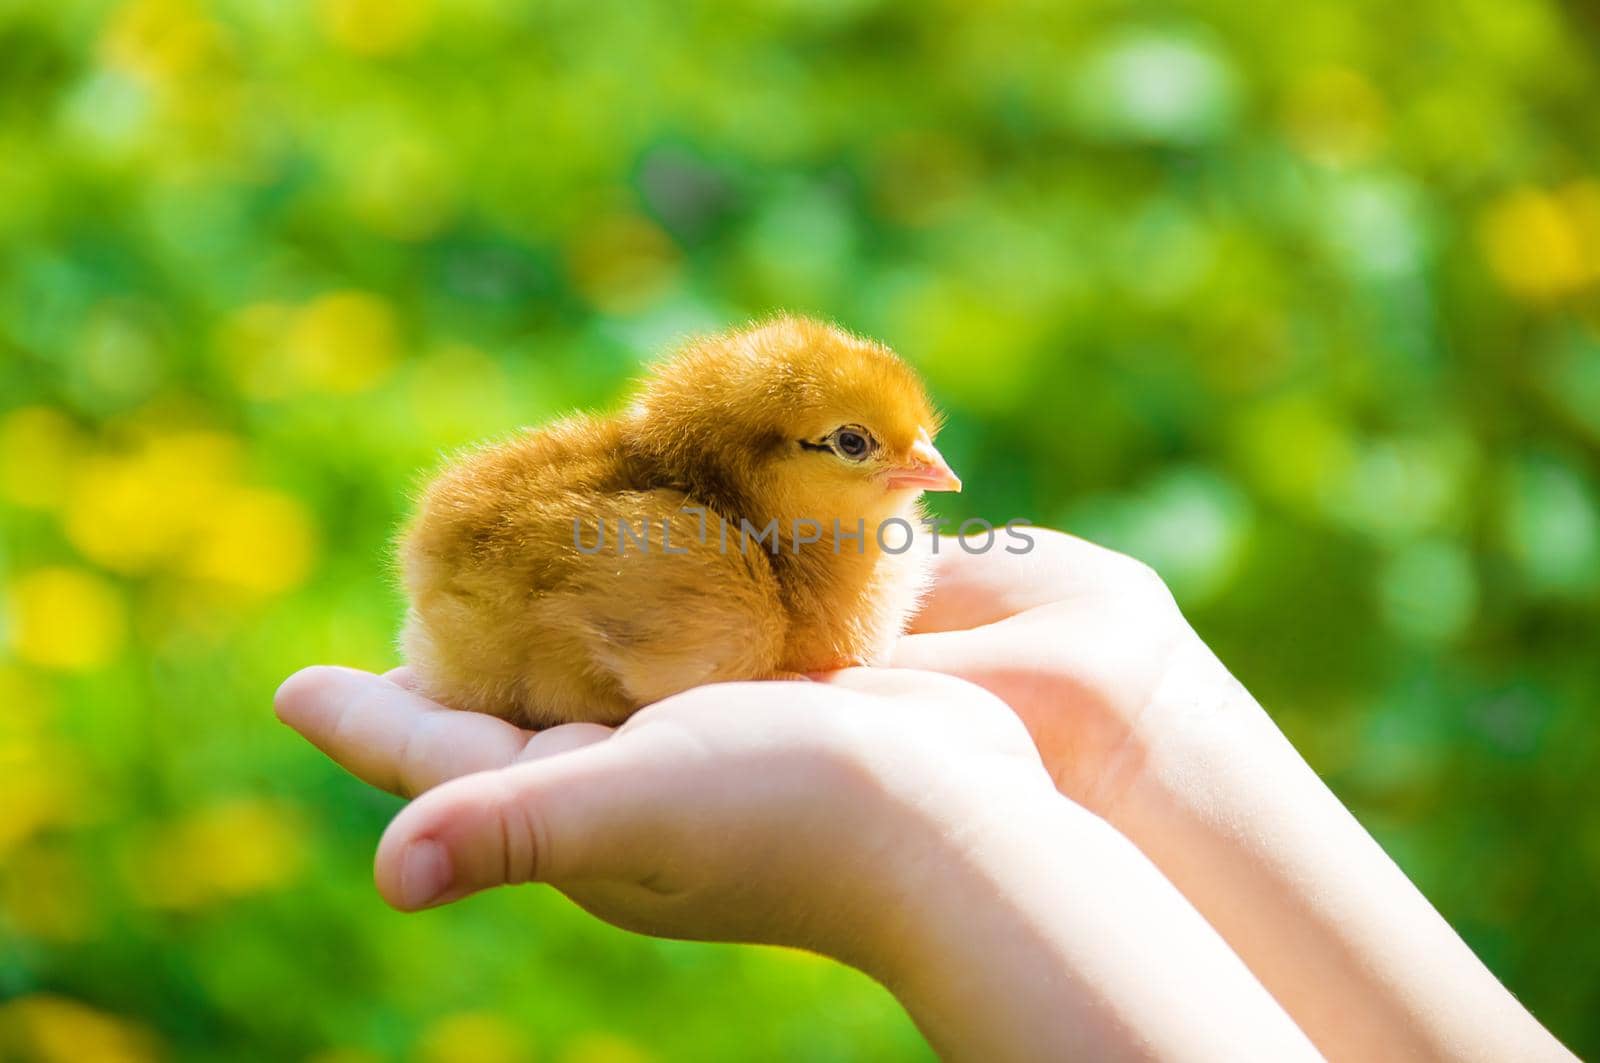 The child holds a chicken in his hands. Selective focus. by yanadjana